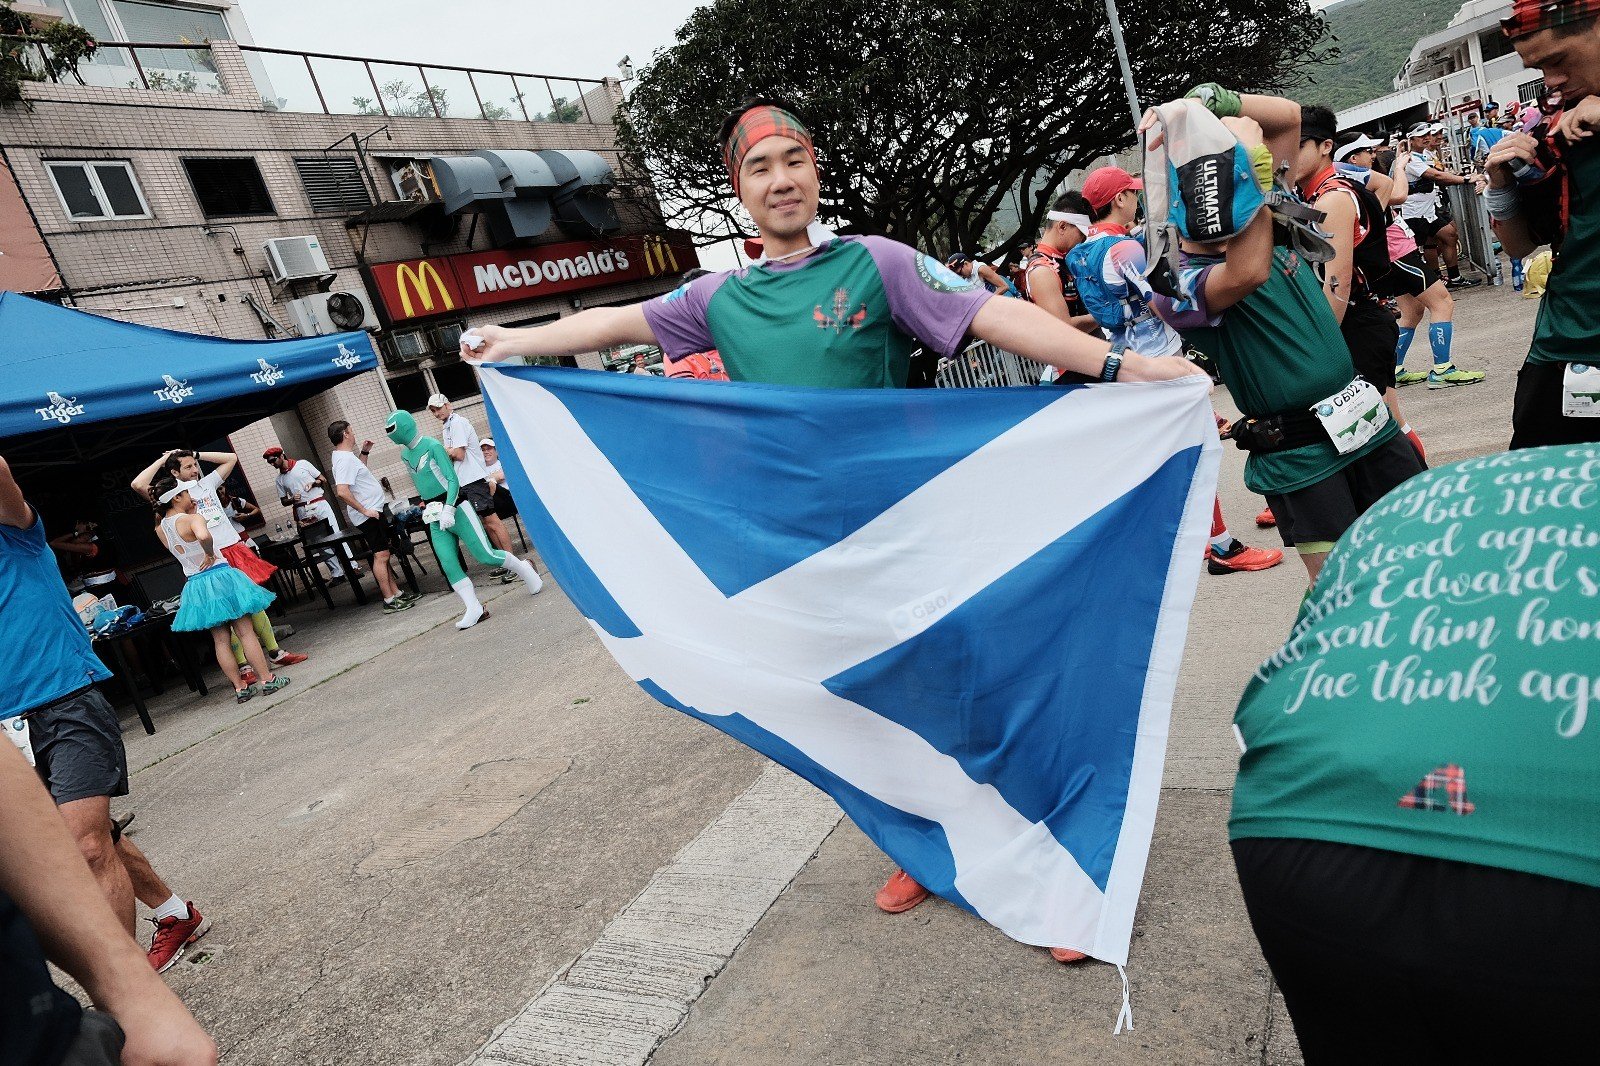 Tony Lai runs for Scotland in the Country of Origin race. The organisers do not distinct between the four nations of the UK, but some of the participants do. Photo: Handout 